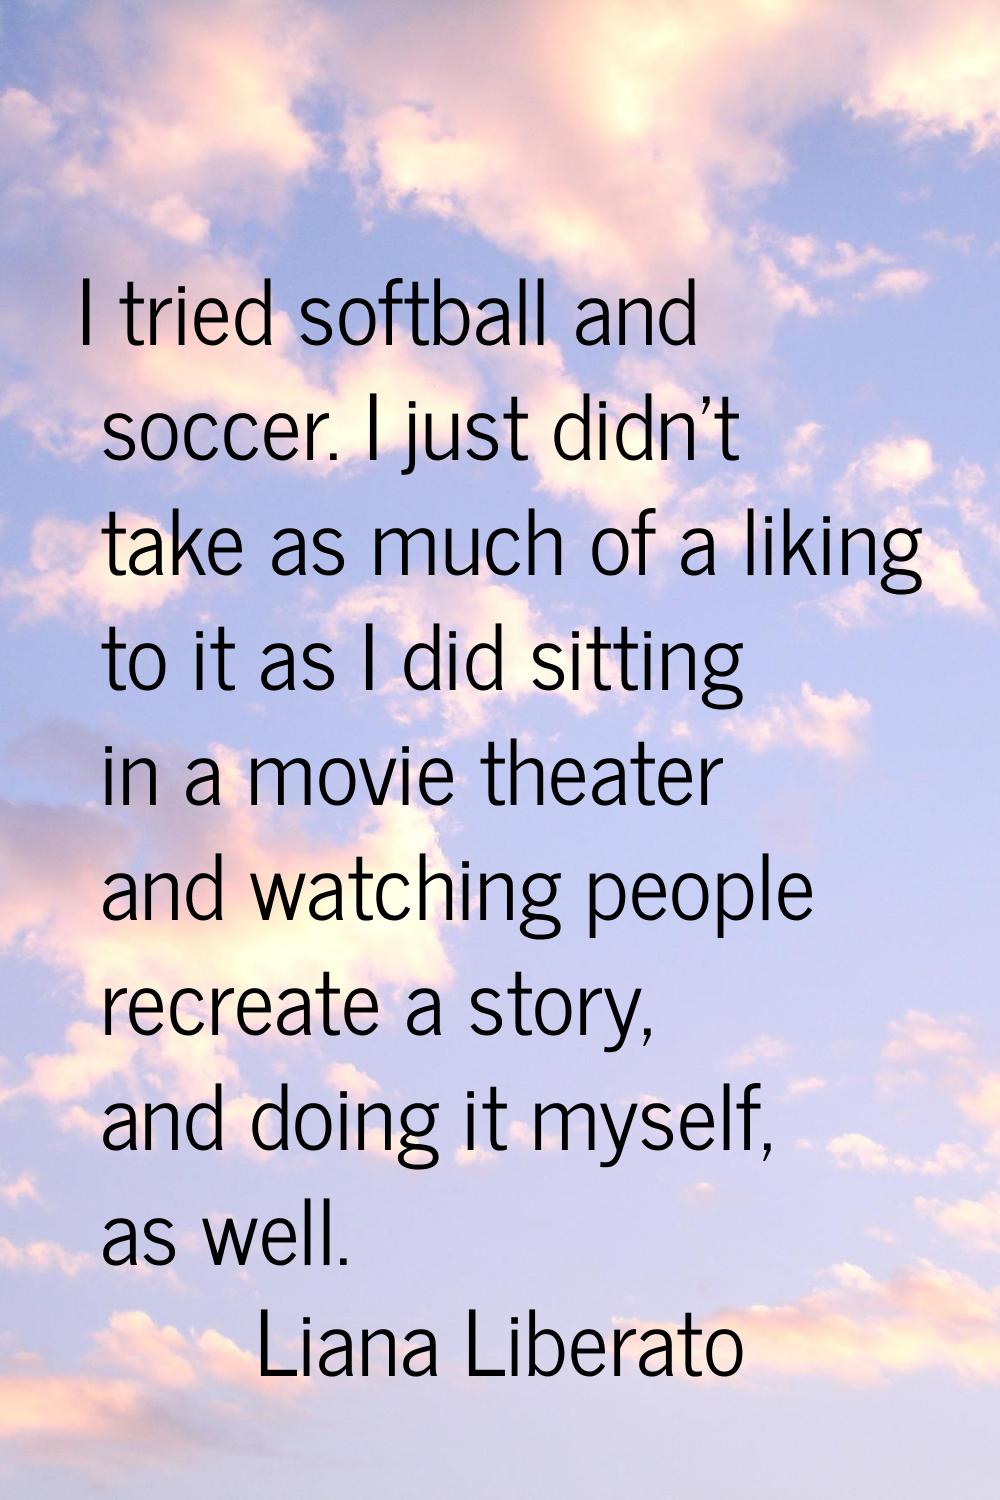 I tried softball and soccer. I just didn't take as much of a liking to it as I did sitting in a mov